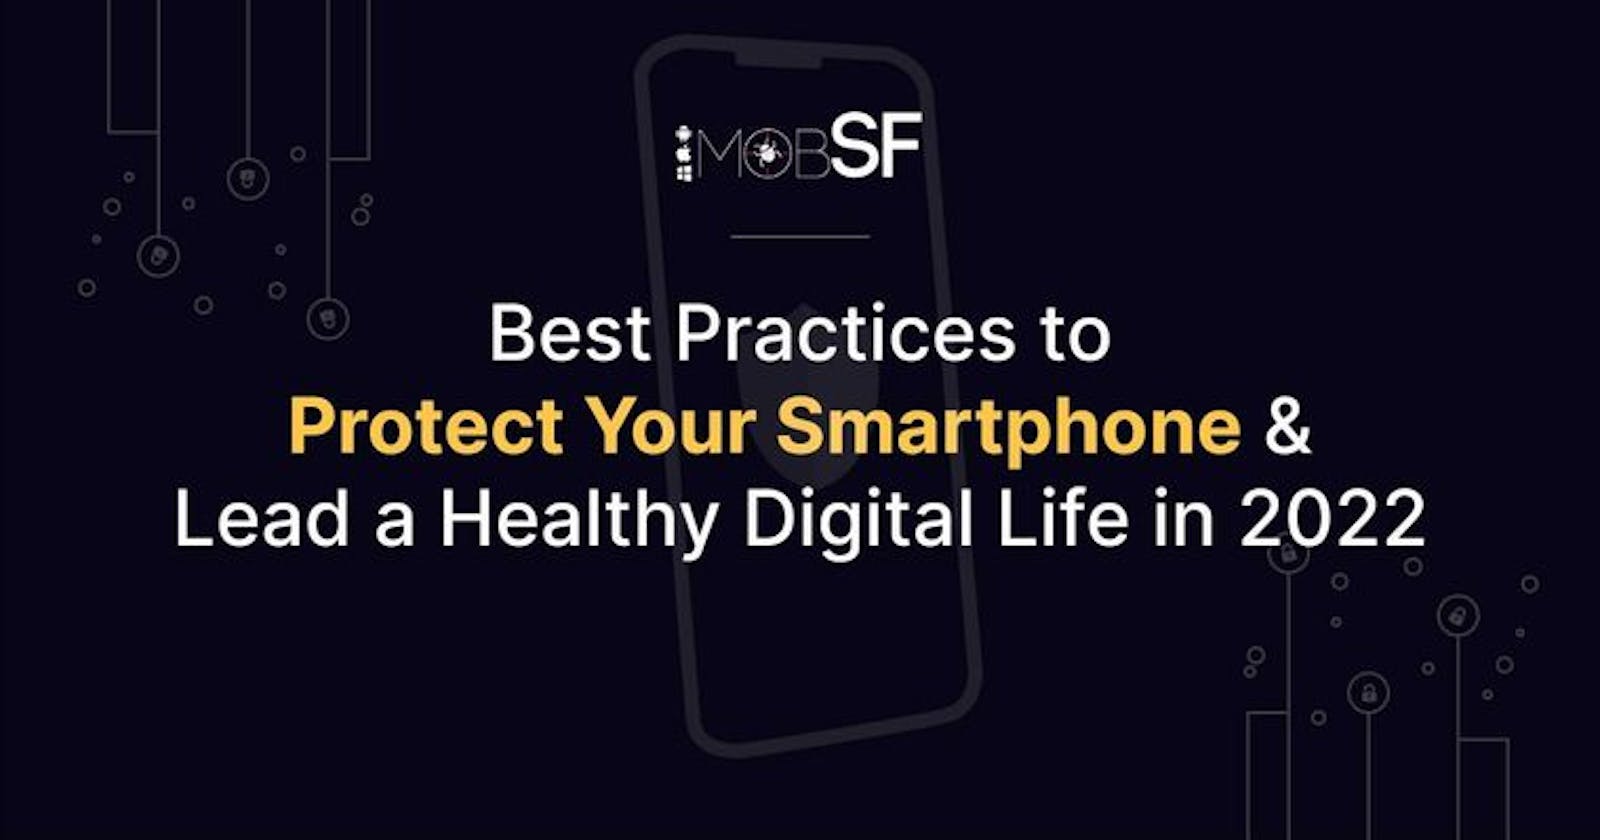 How to Protect Your Digital Life